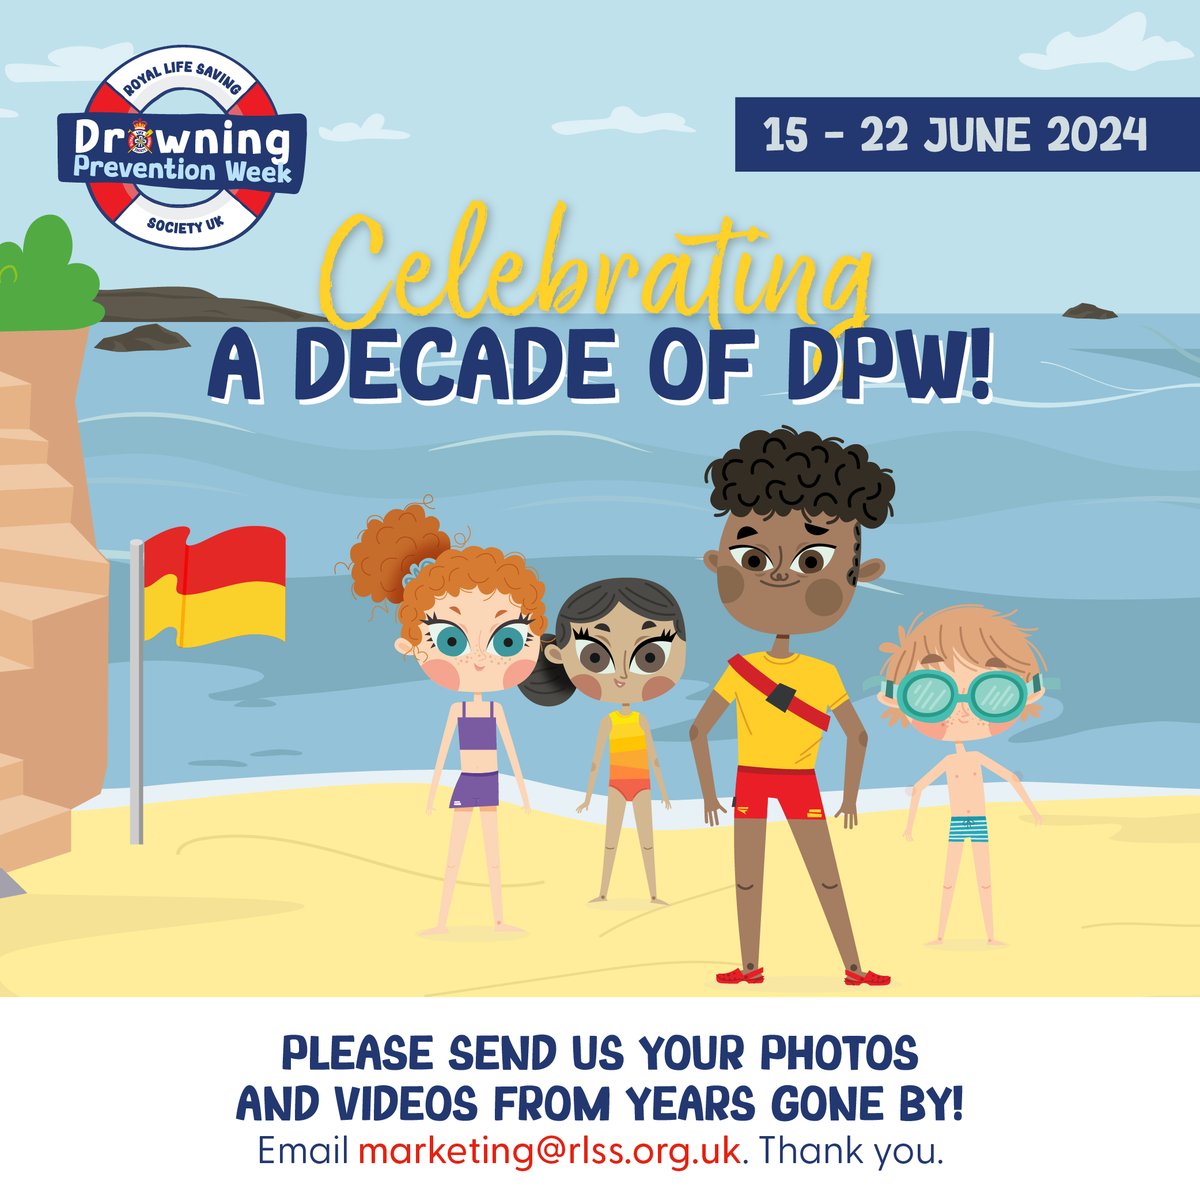 2 months 'til #DrowningPreventionWeek 2024! 🙌 2023 marked our milestone tenth year of #DPW so as we enter our second decade, we want to celebrate your support from years gone by… Please send your photos & videos to marketing@rlss.org.uk for inclusion! rlss.org.uk/Blog/celebrati…